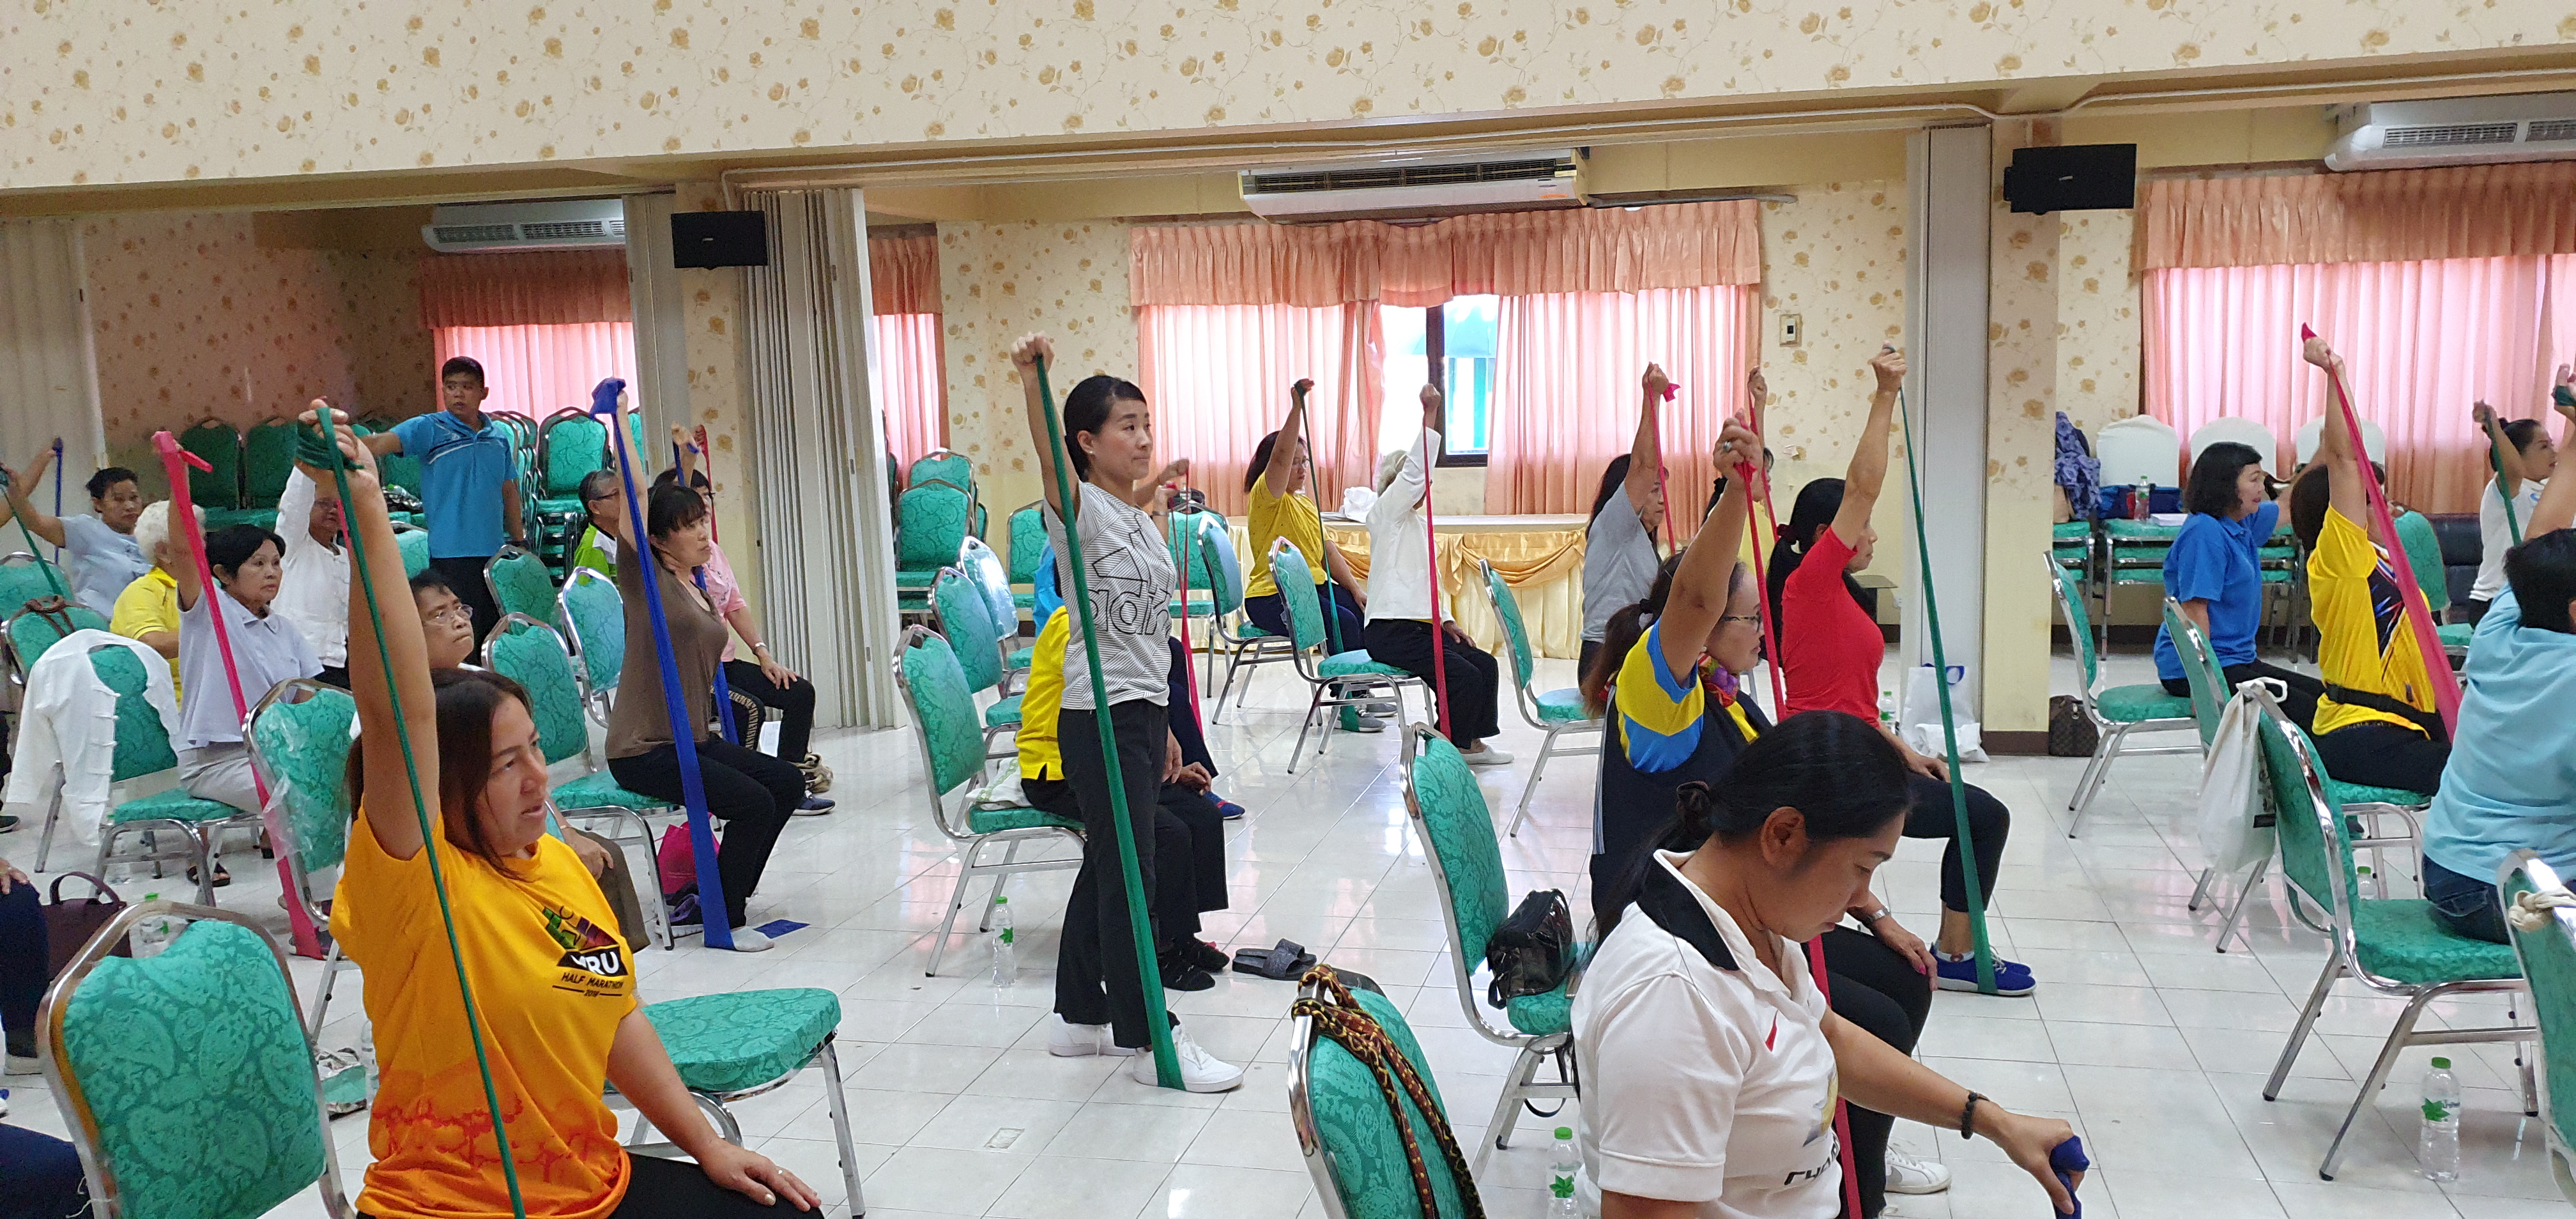 Title Training community volunteers to become the leader for care prevention group exercise 20191115_105114